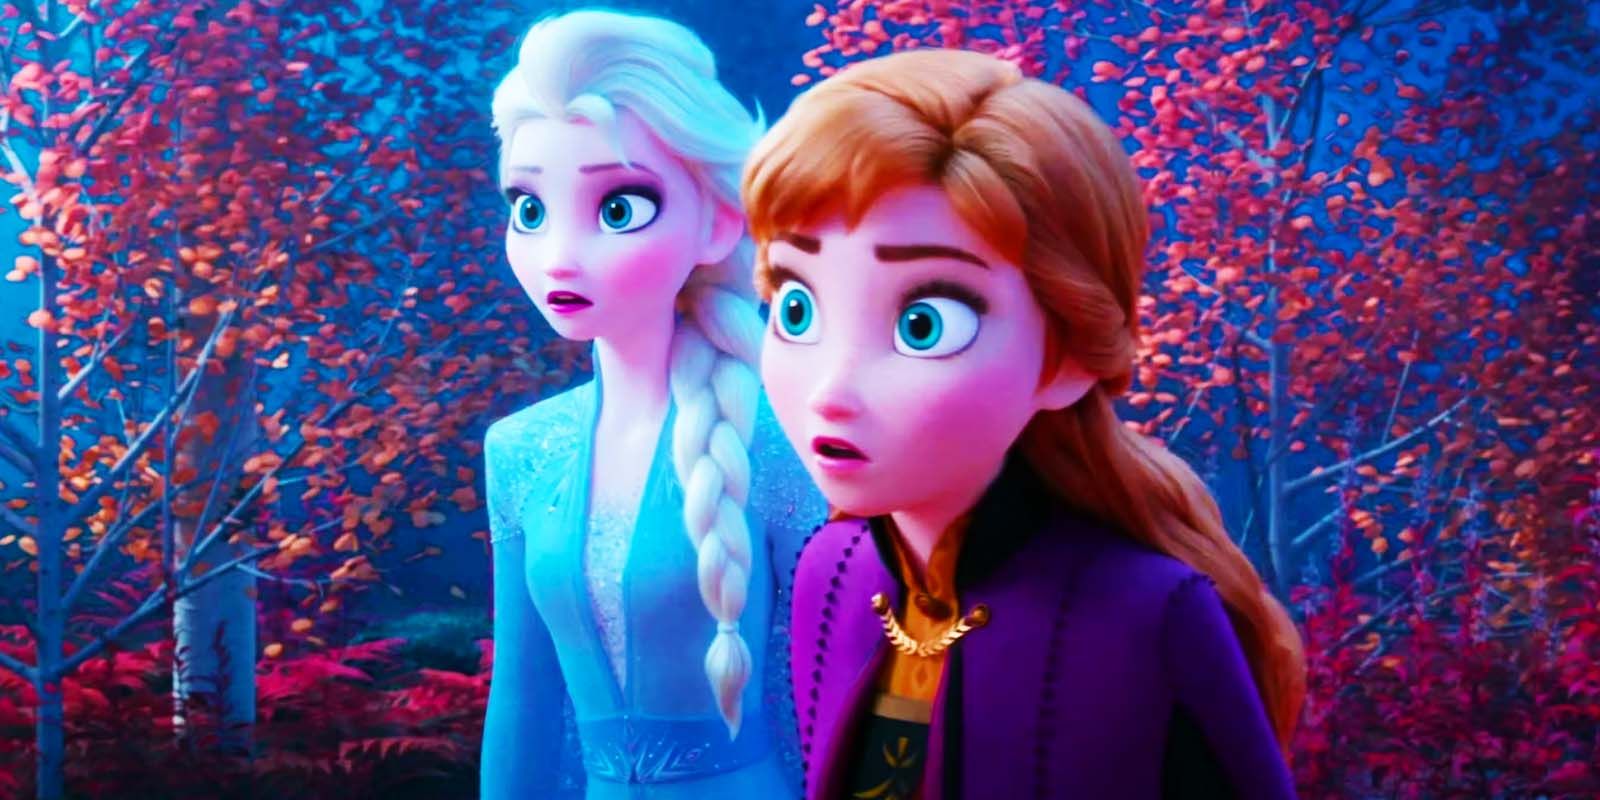 Elsa and Anna look off to the side shocked in Frozen II.